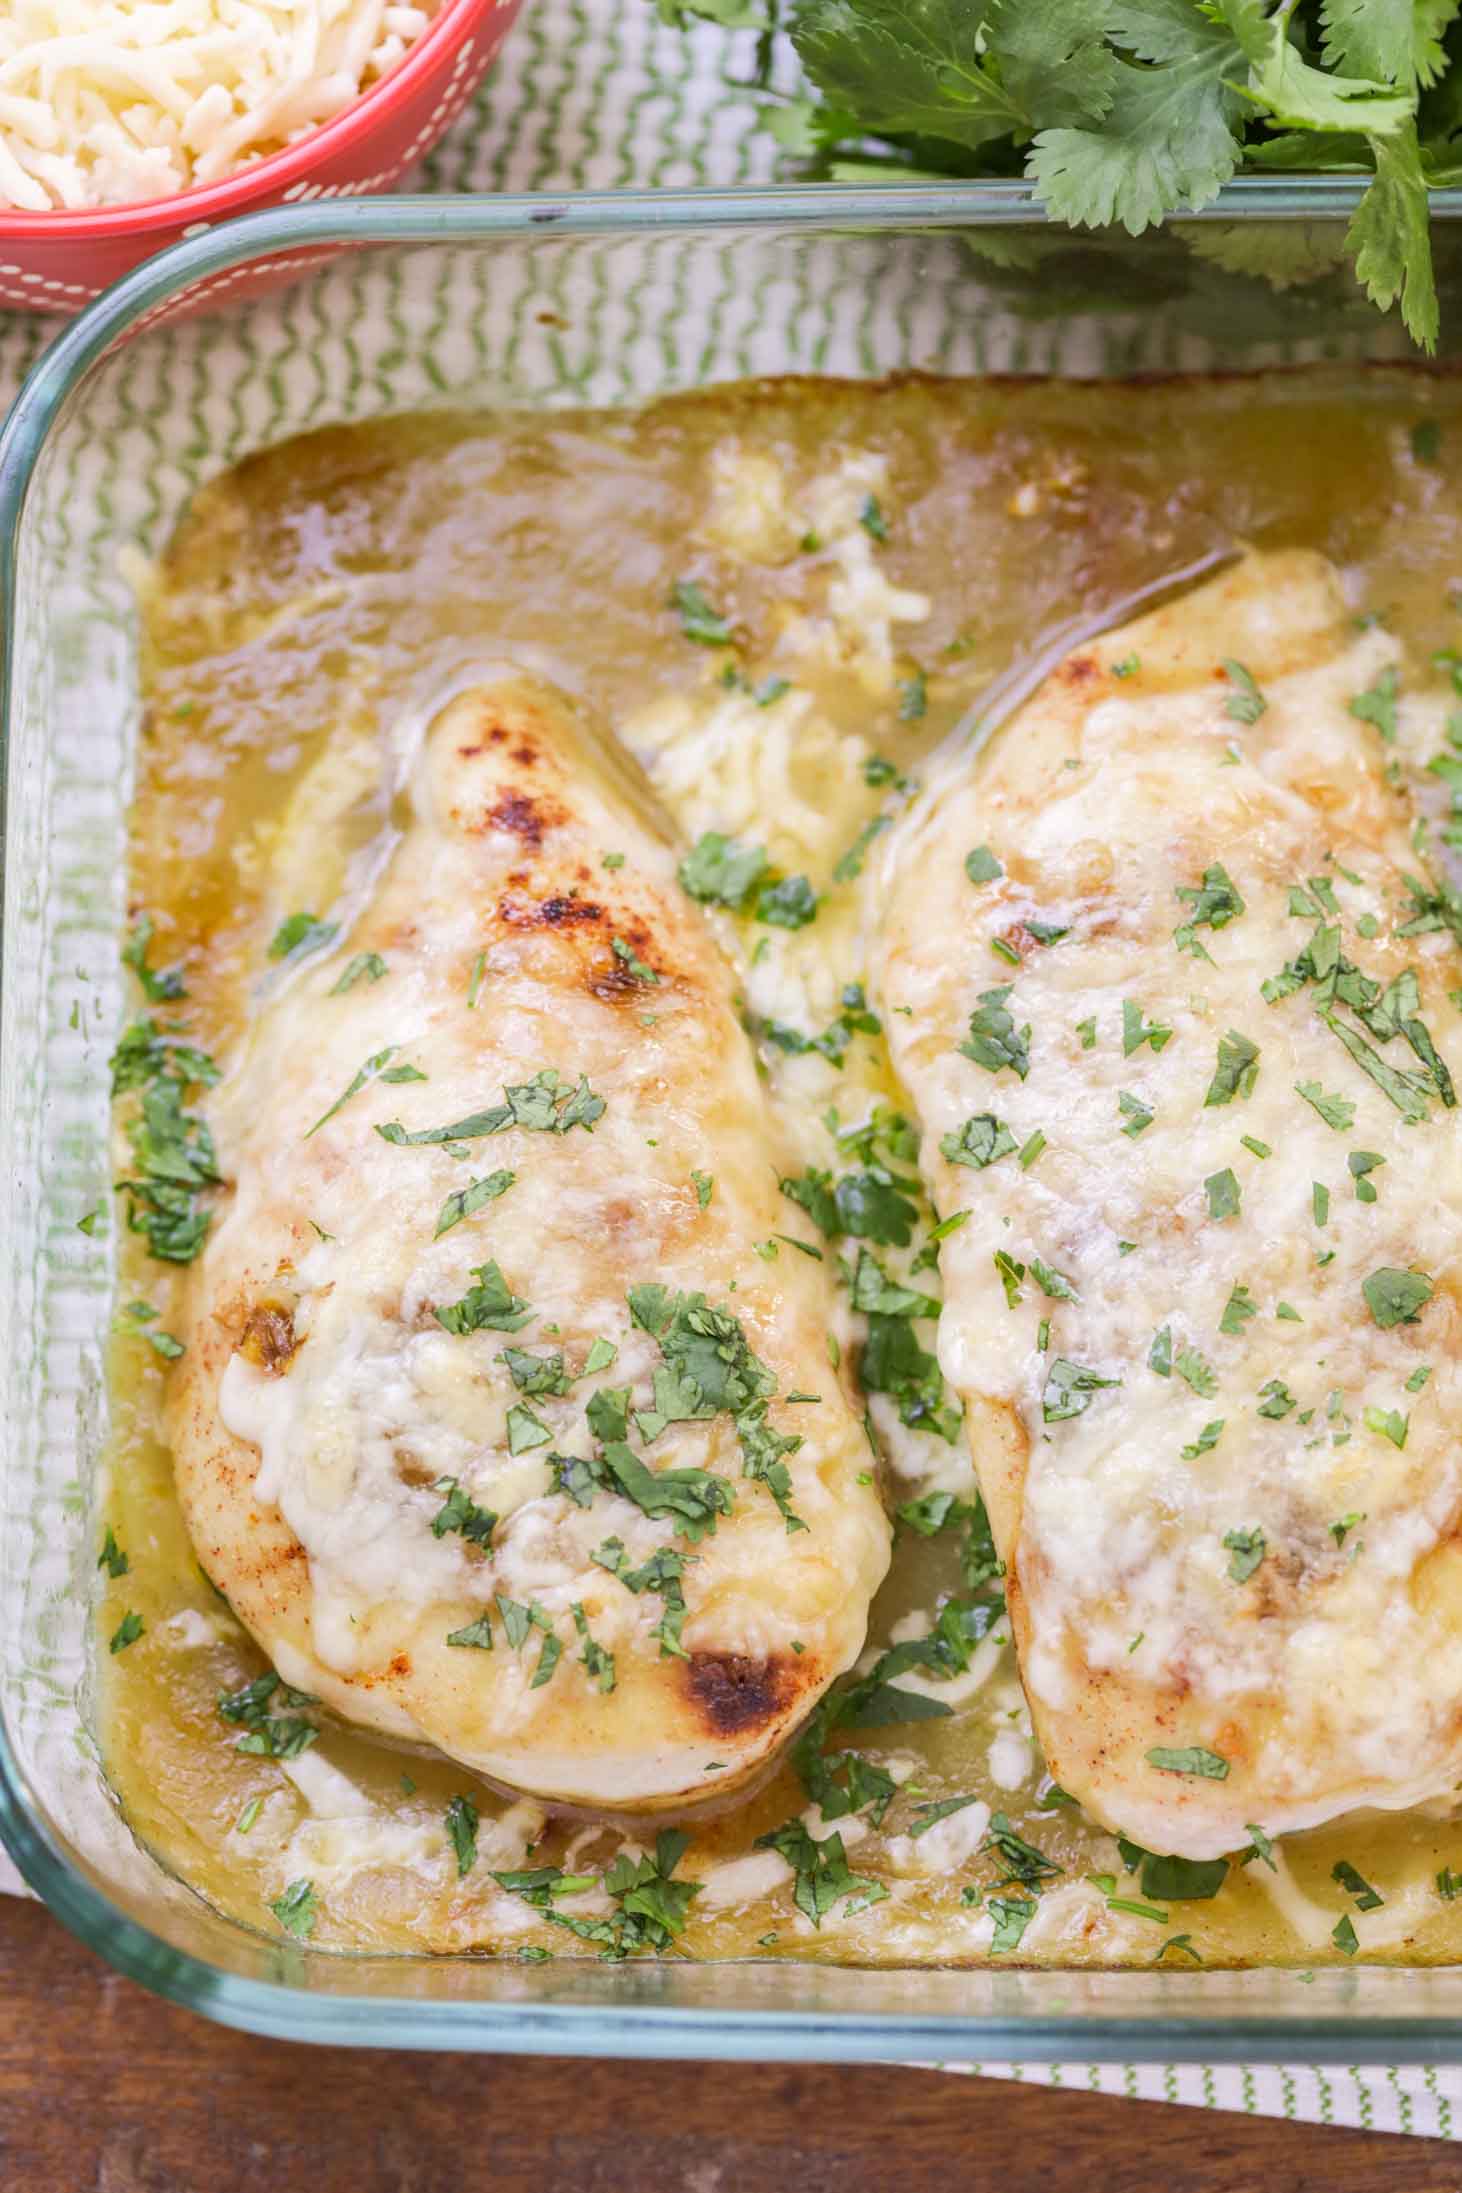 Green Chili Chicken in a glass baking dish